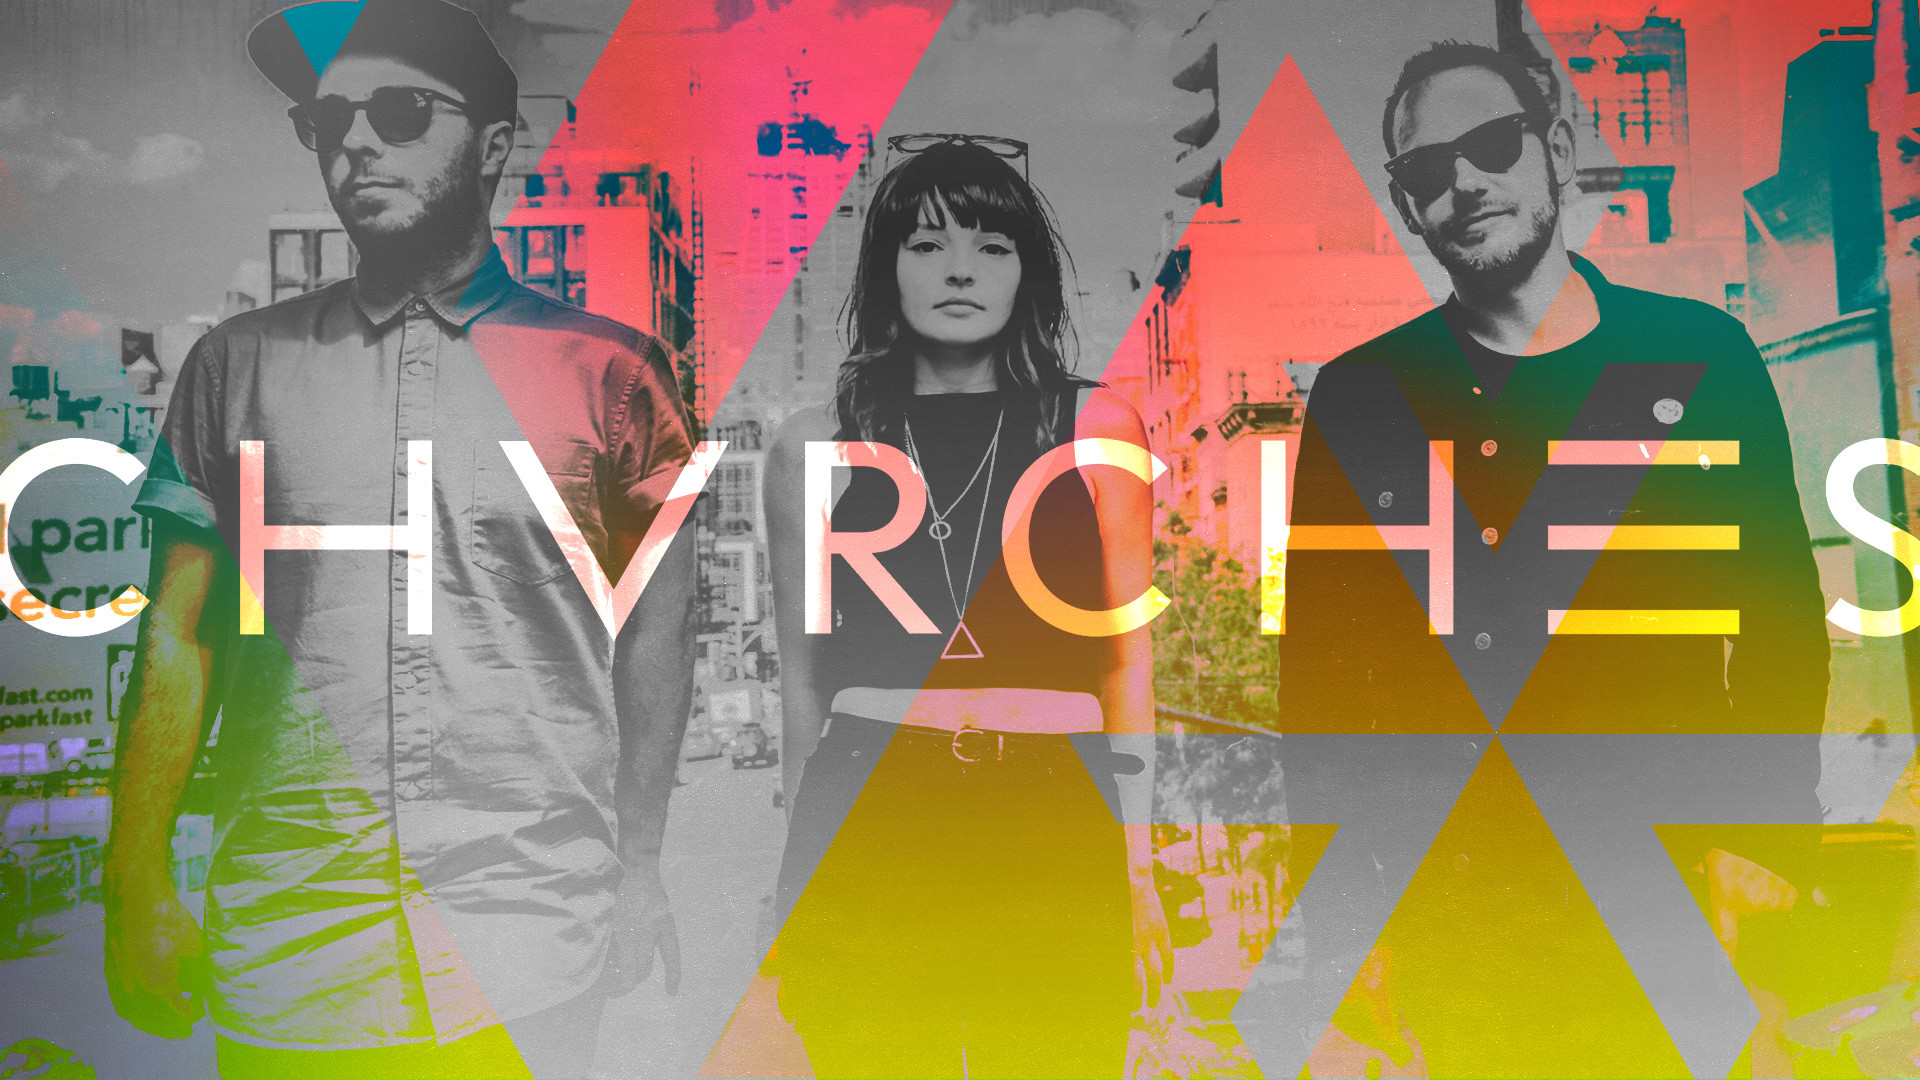 Chvrches Wallpapers